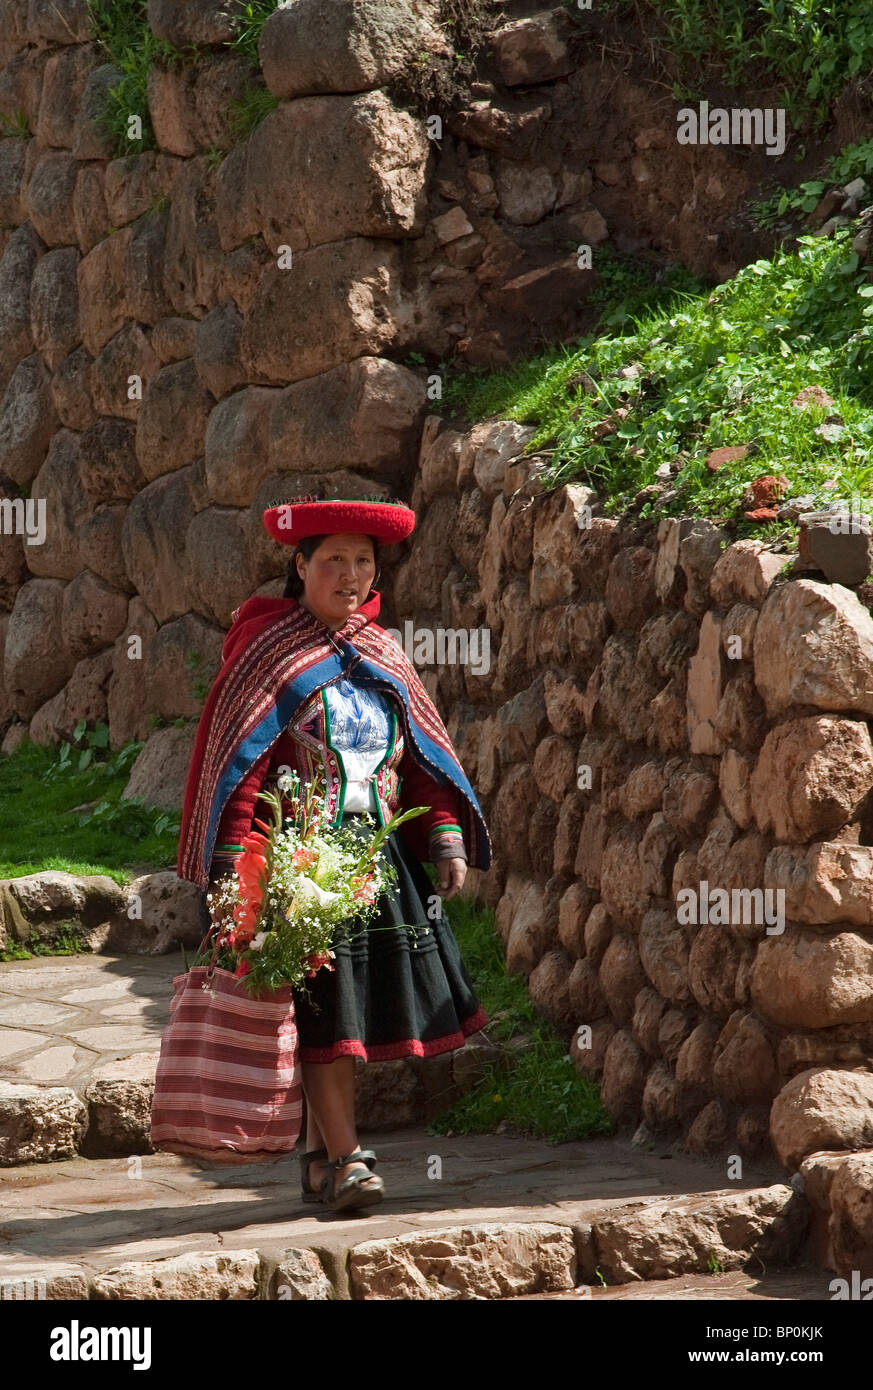 Peru, A woman takes home a bunch of flowers from market on a path running alongside a massive Inca stone wall. Stock Photo